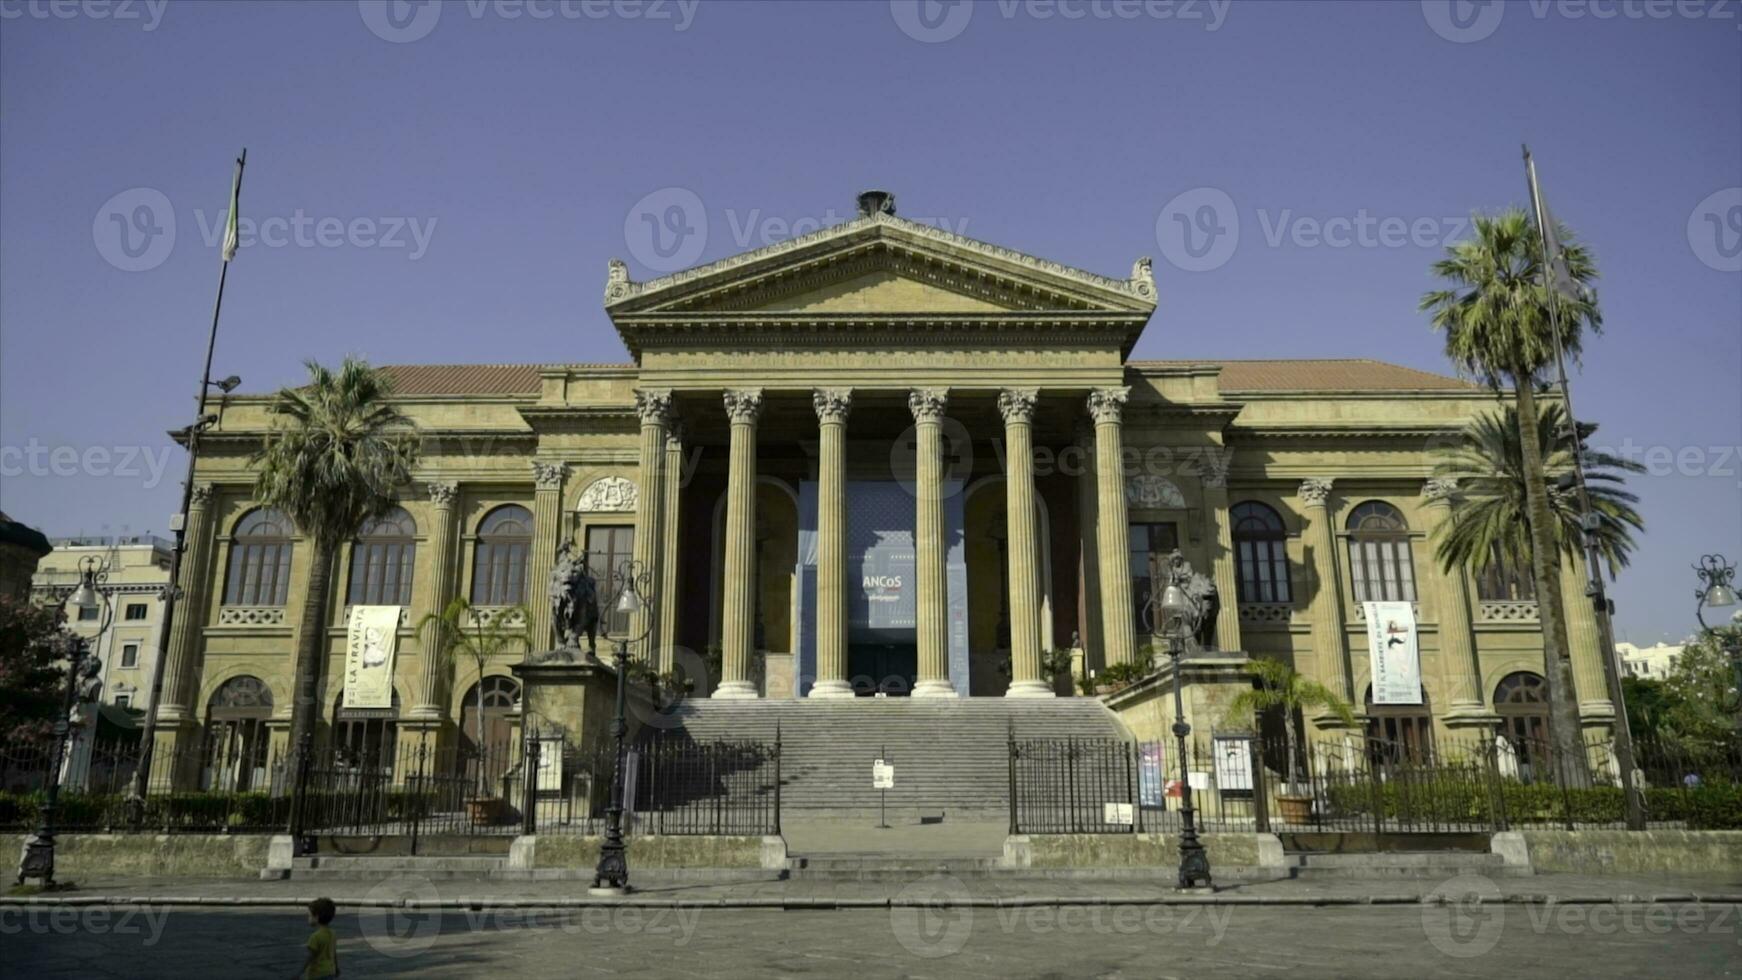 Facade of ancient building with columns and triangular portico. Action. Beautiful historical building with antique architecture and columns on blue sky background photo